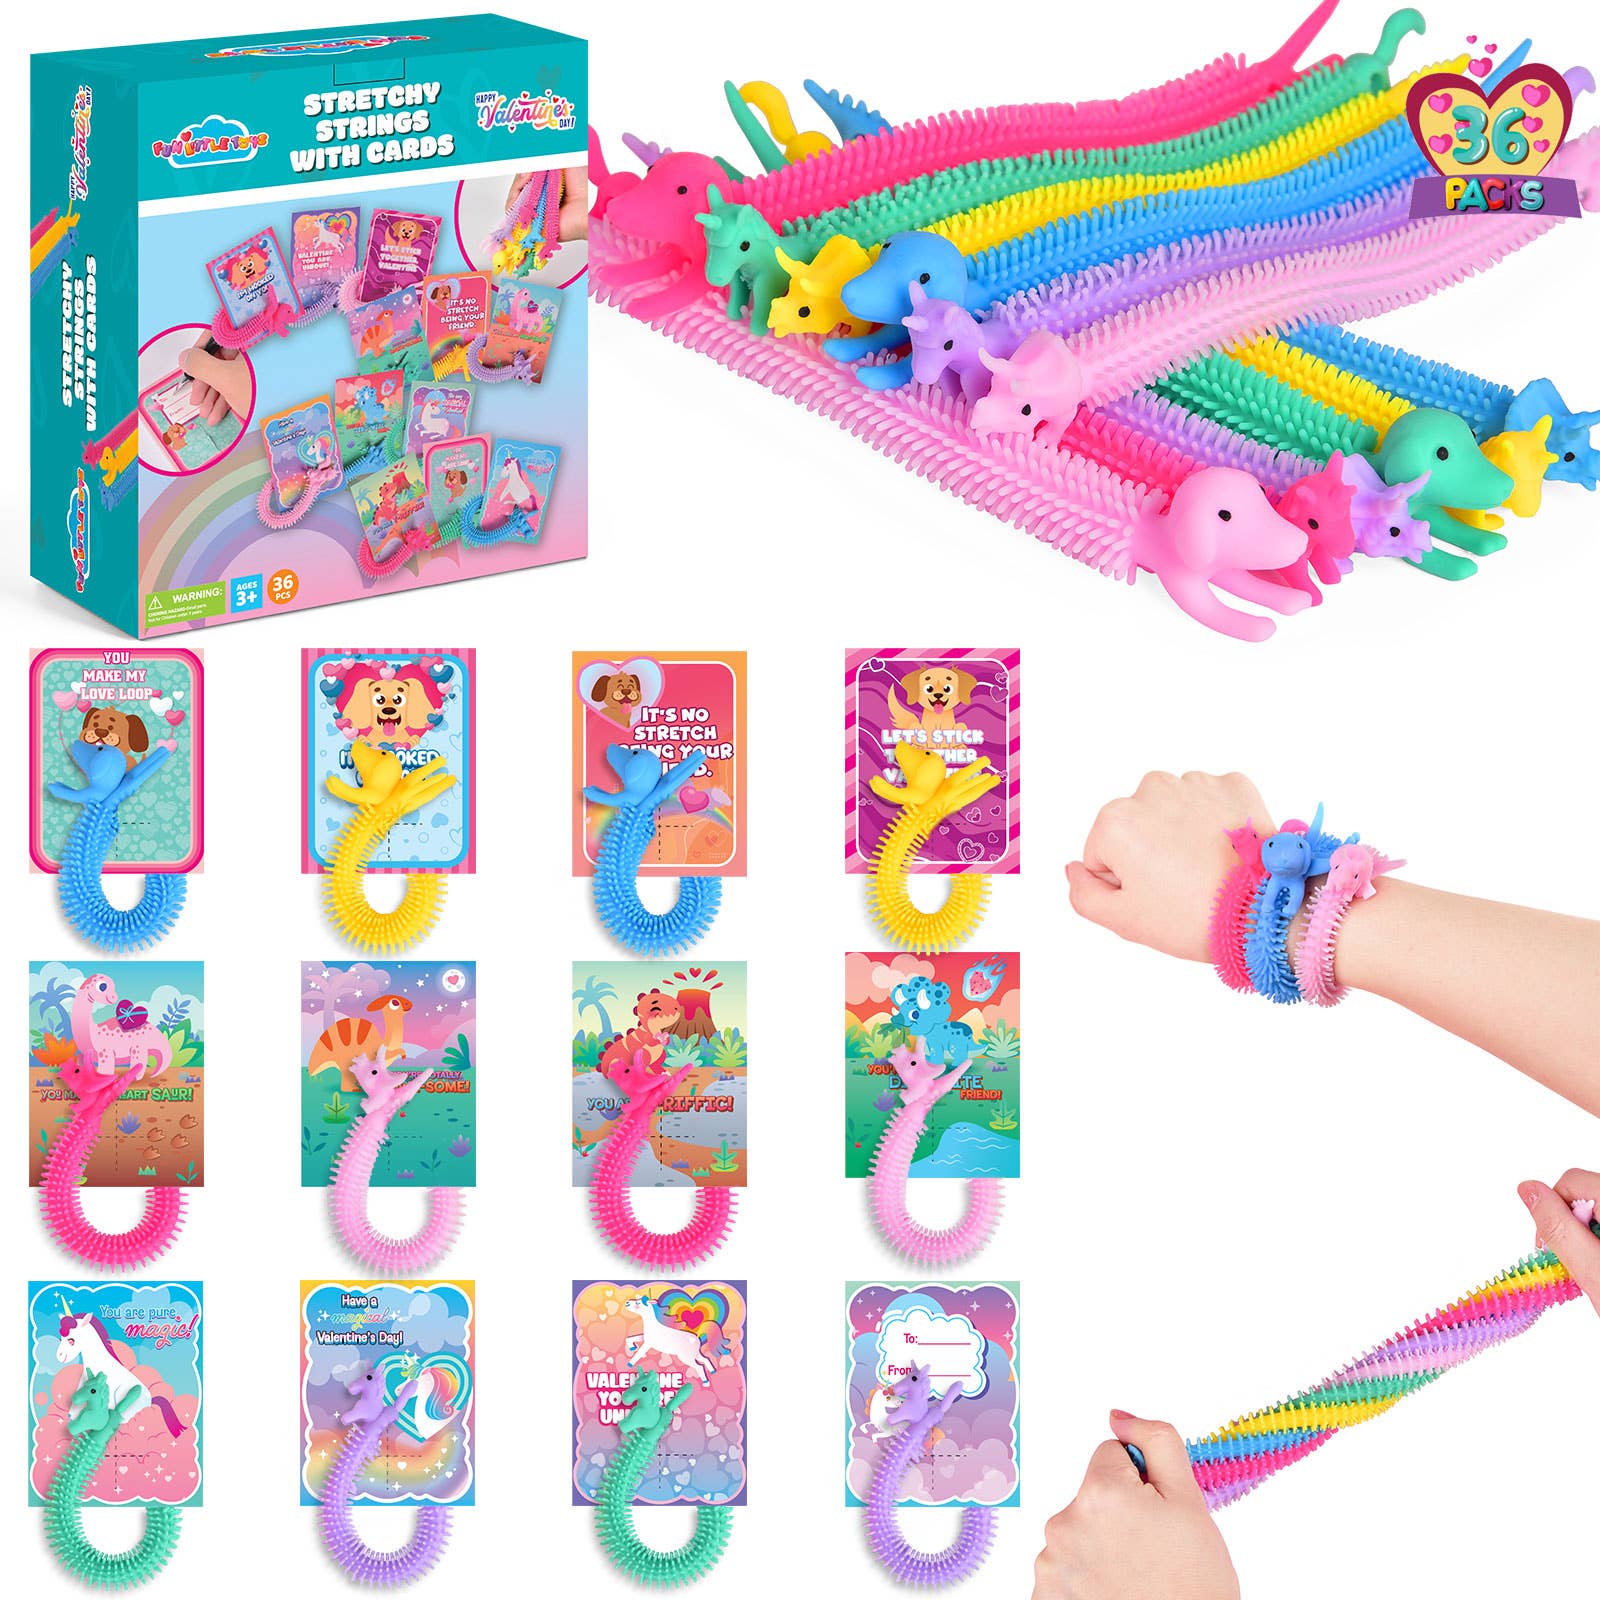 LITTLEFUN Birthday Gift for 3 4 5 6 Year Old Girls, Bracelet Jewellery Making Kits for Kids Boys Necklace Bracelet Crafts Toy